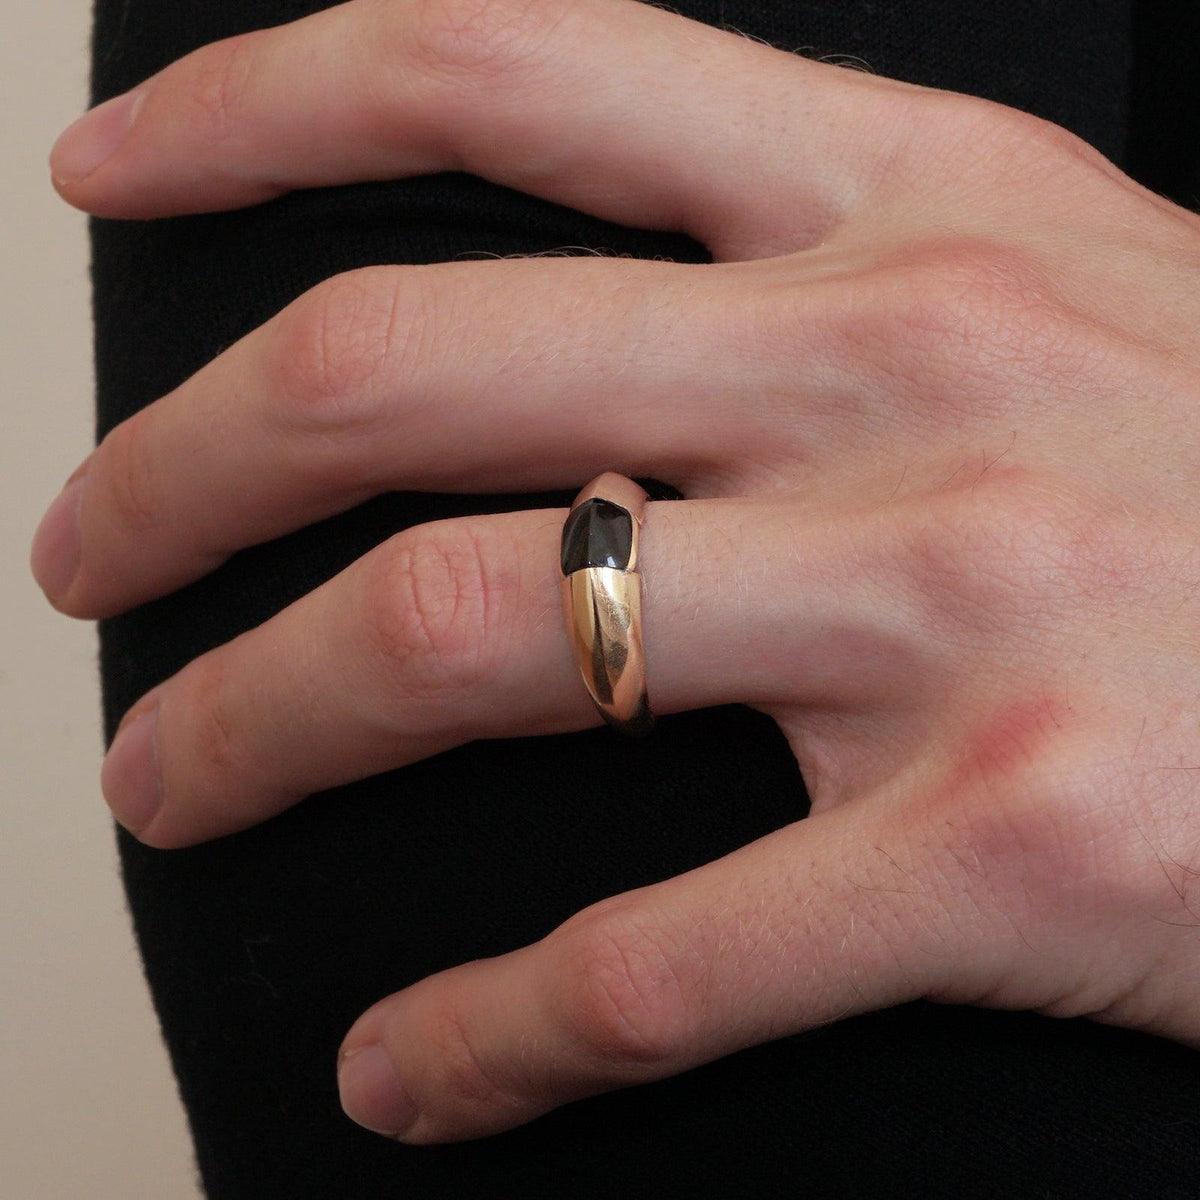 Black Onyx Bevel Ring in Sterling Silver and 14K Gold, 7mm